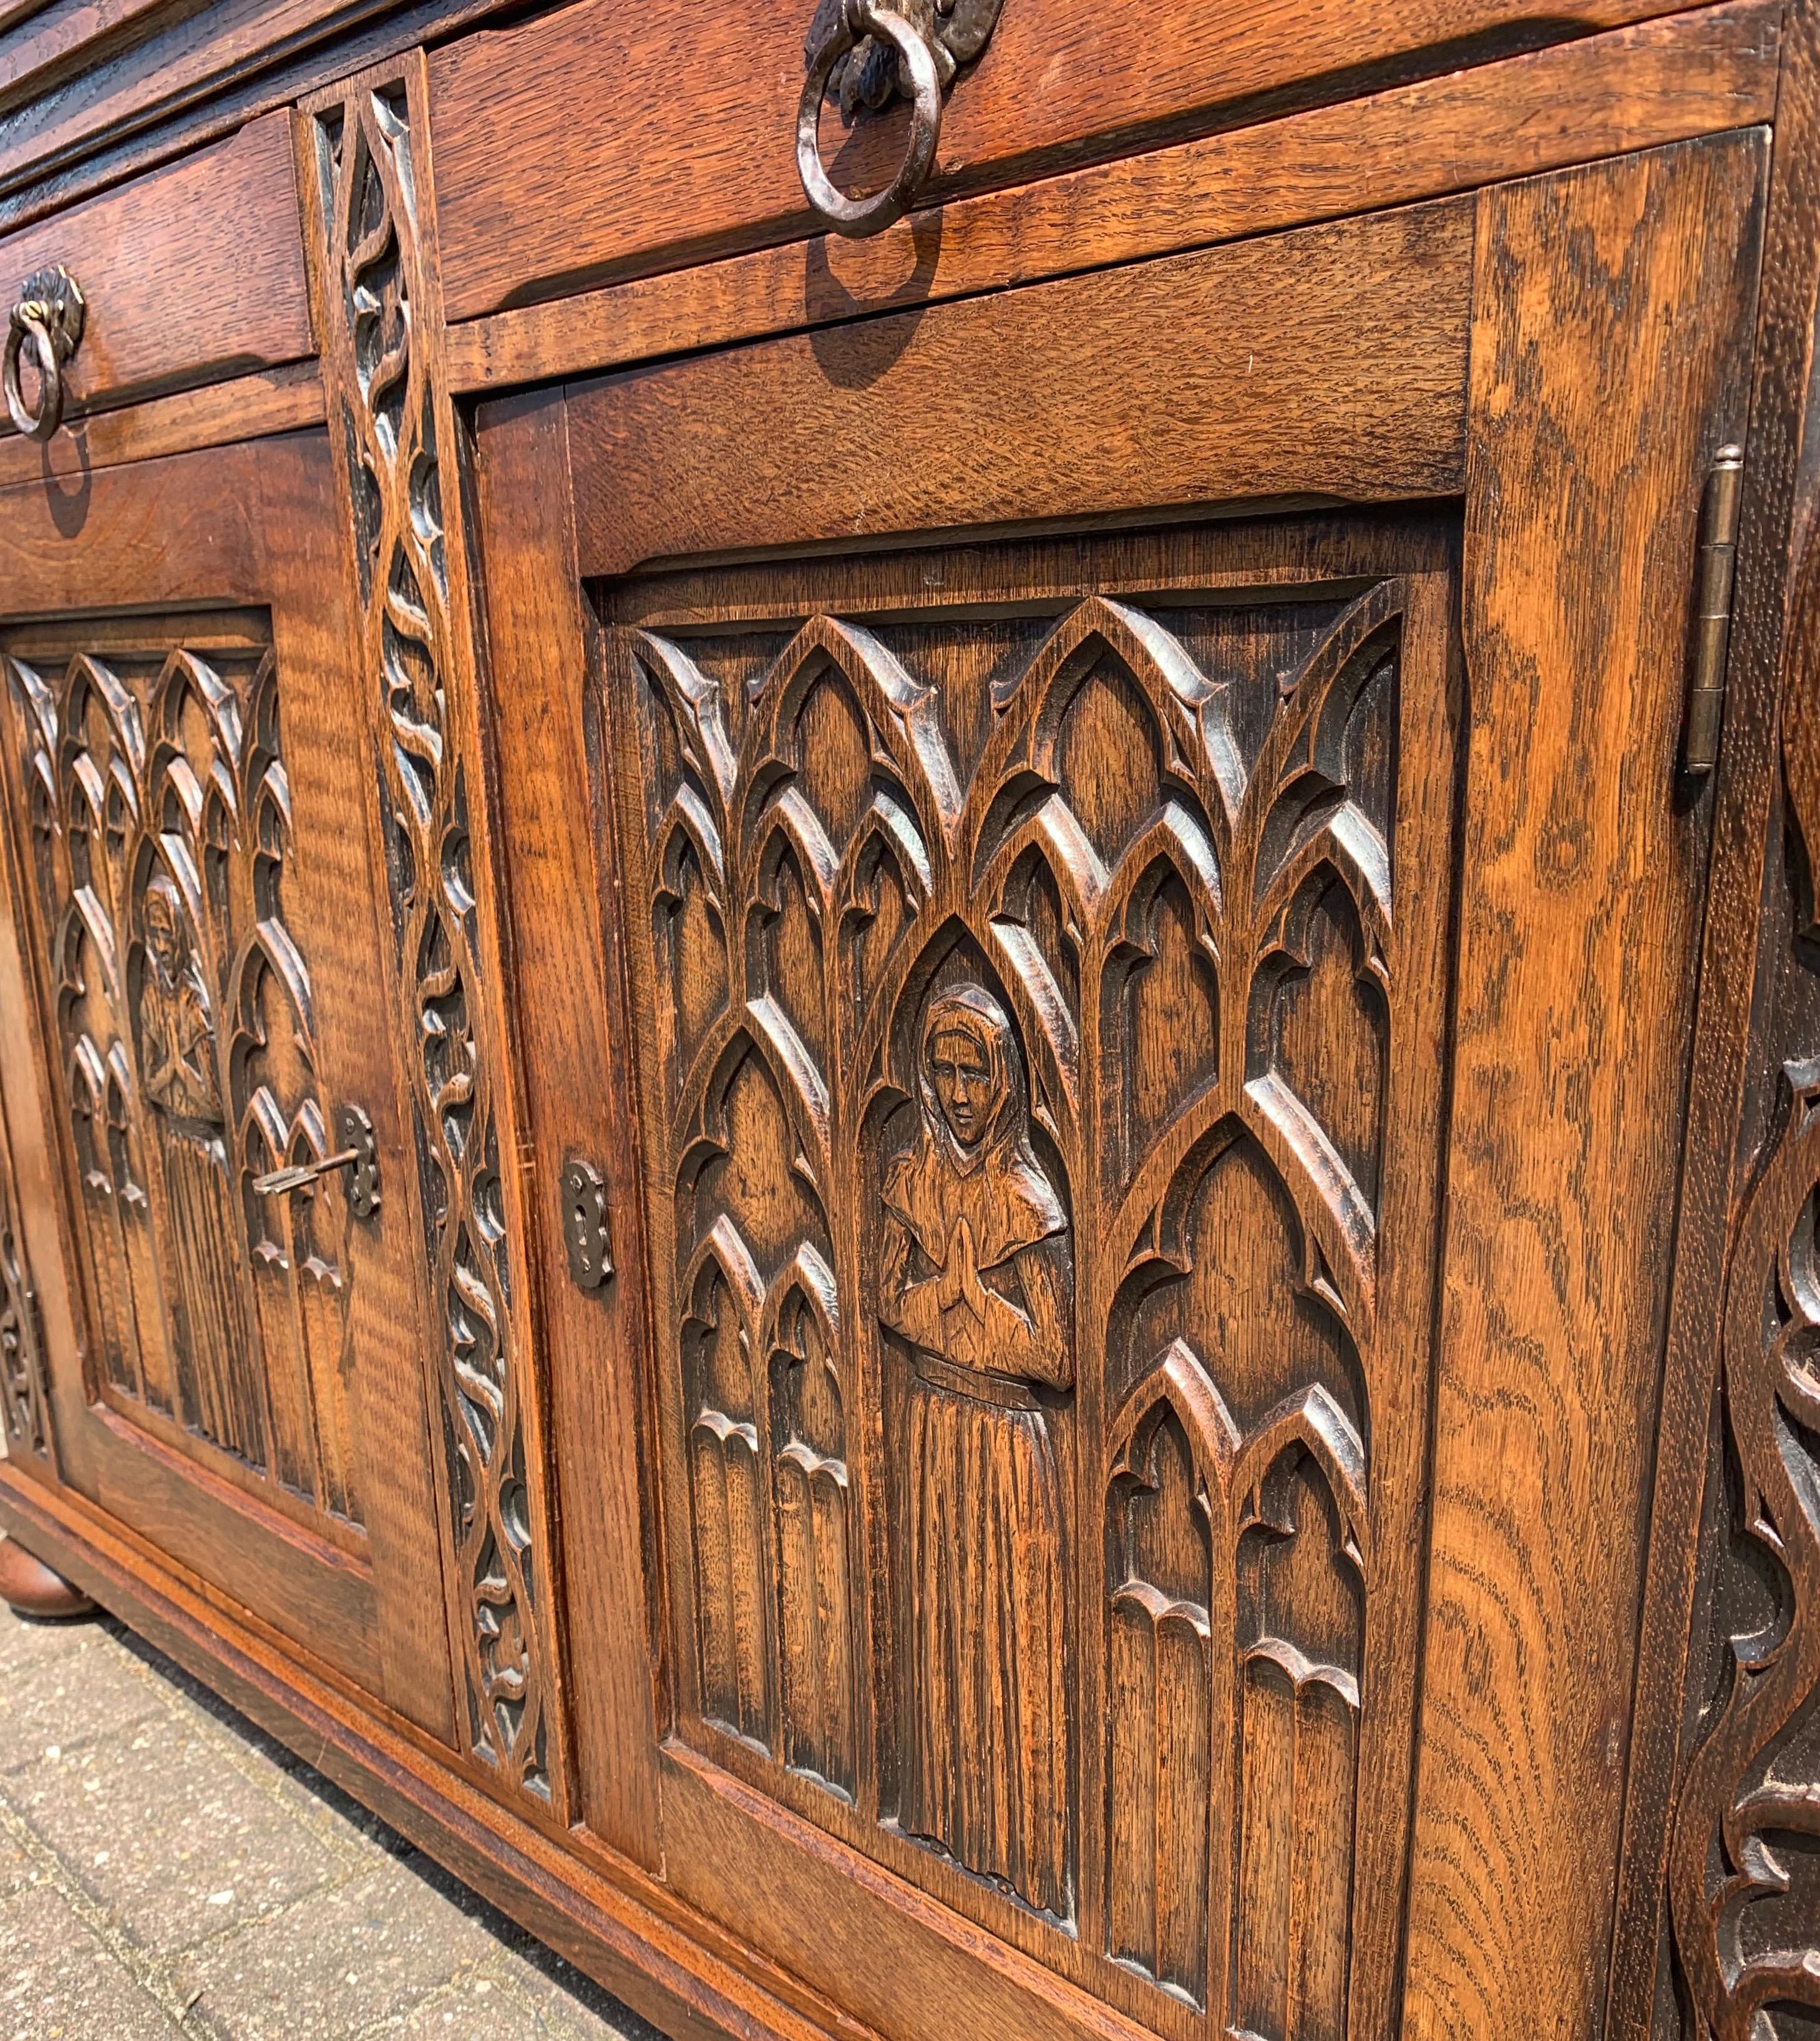 Meaningful Gothic Revival Cabinet / Small Credenza with Praying Nun Sculptures 1